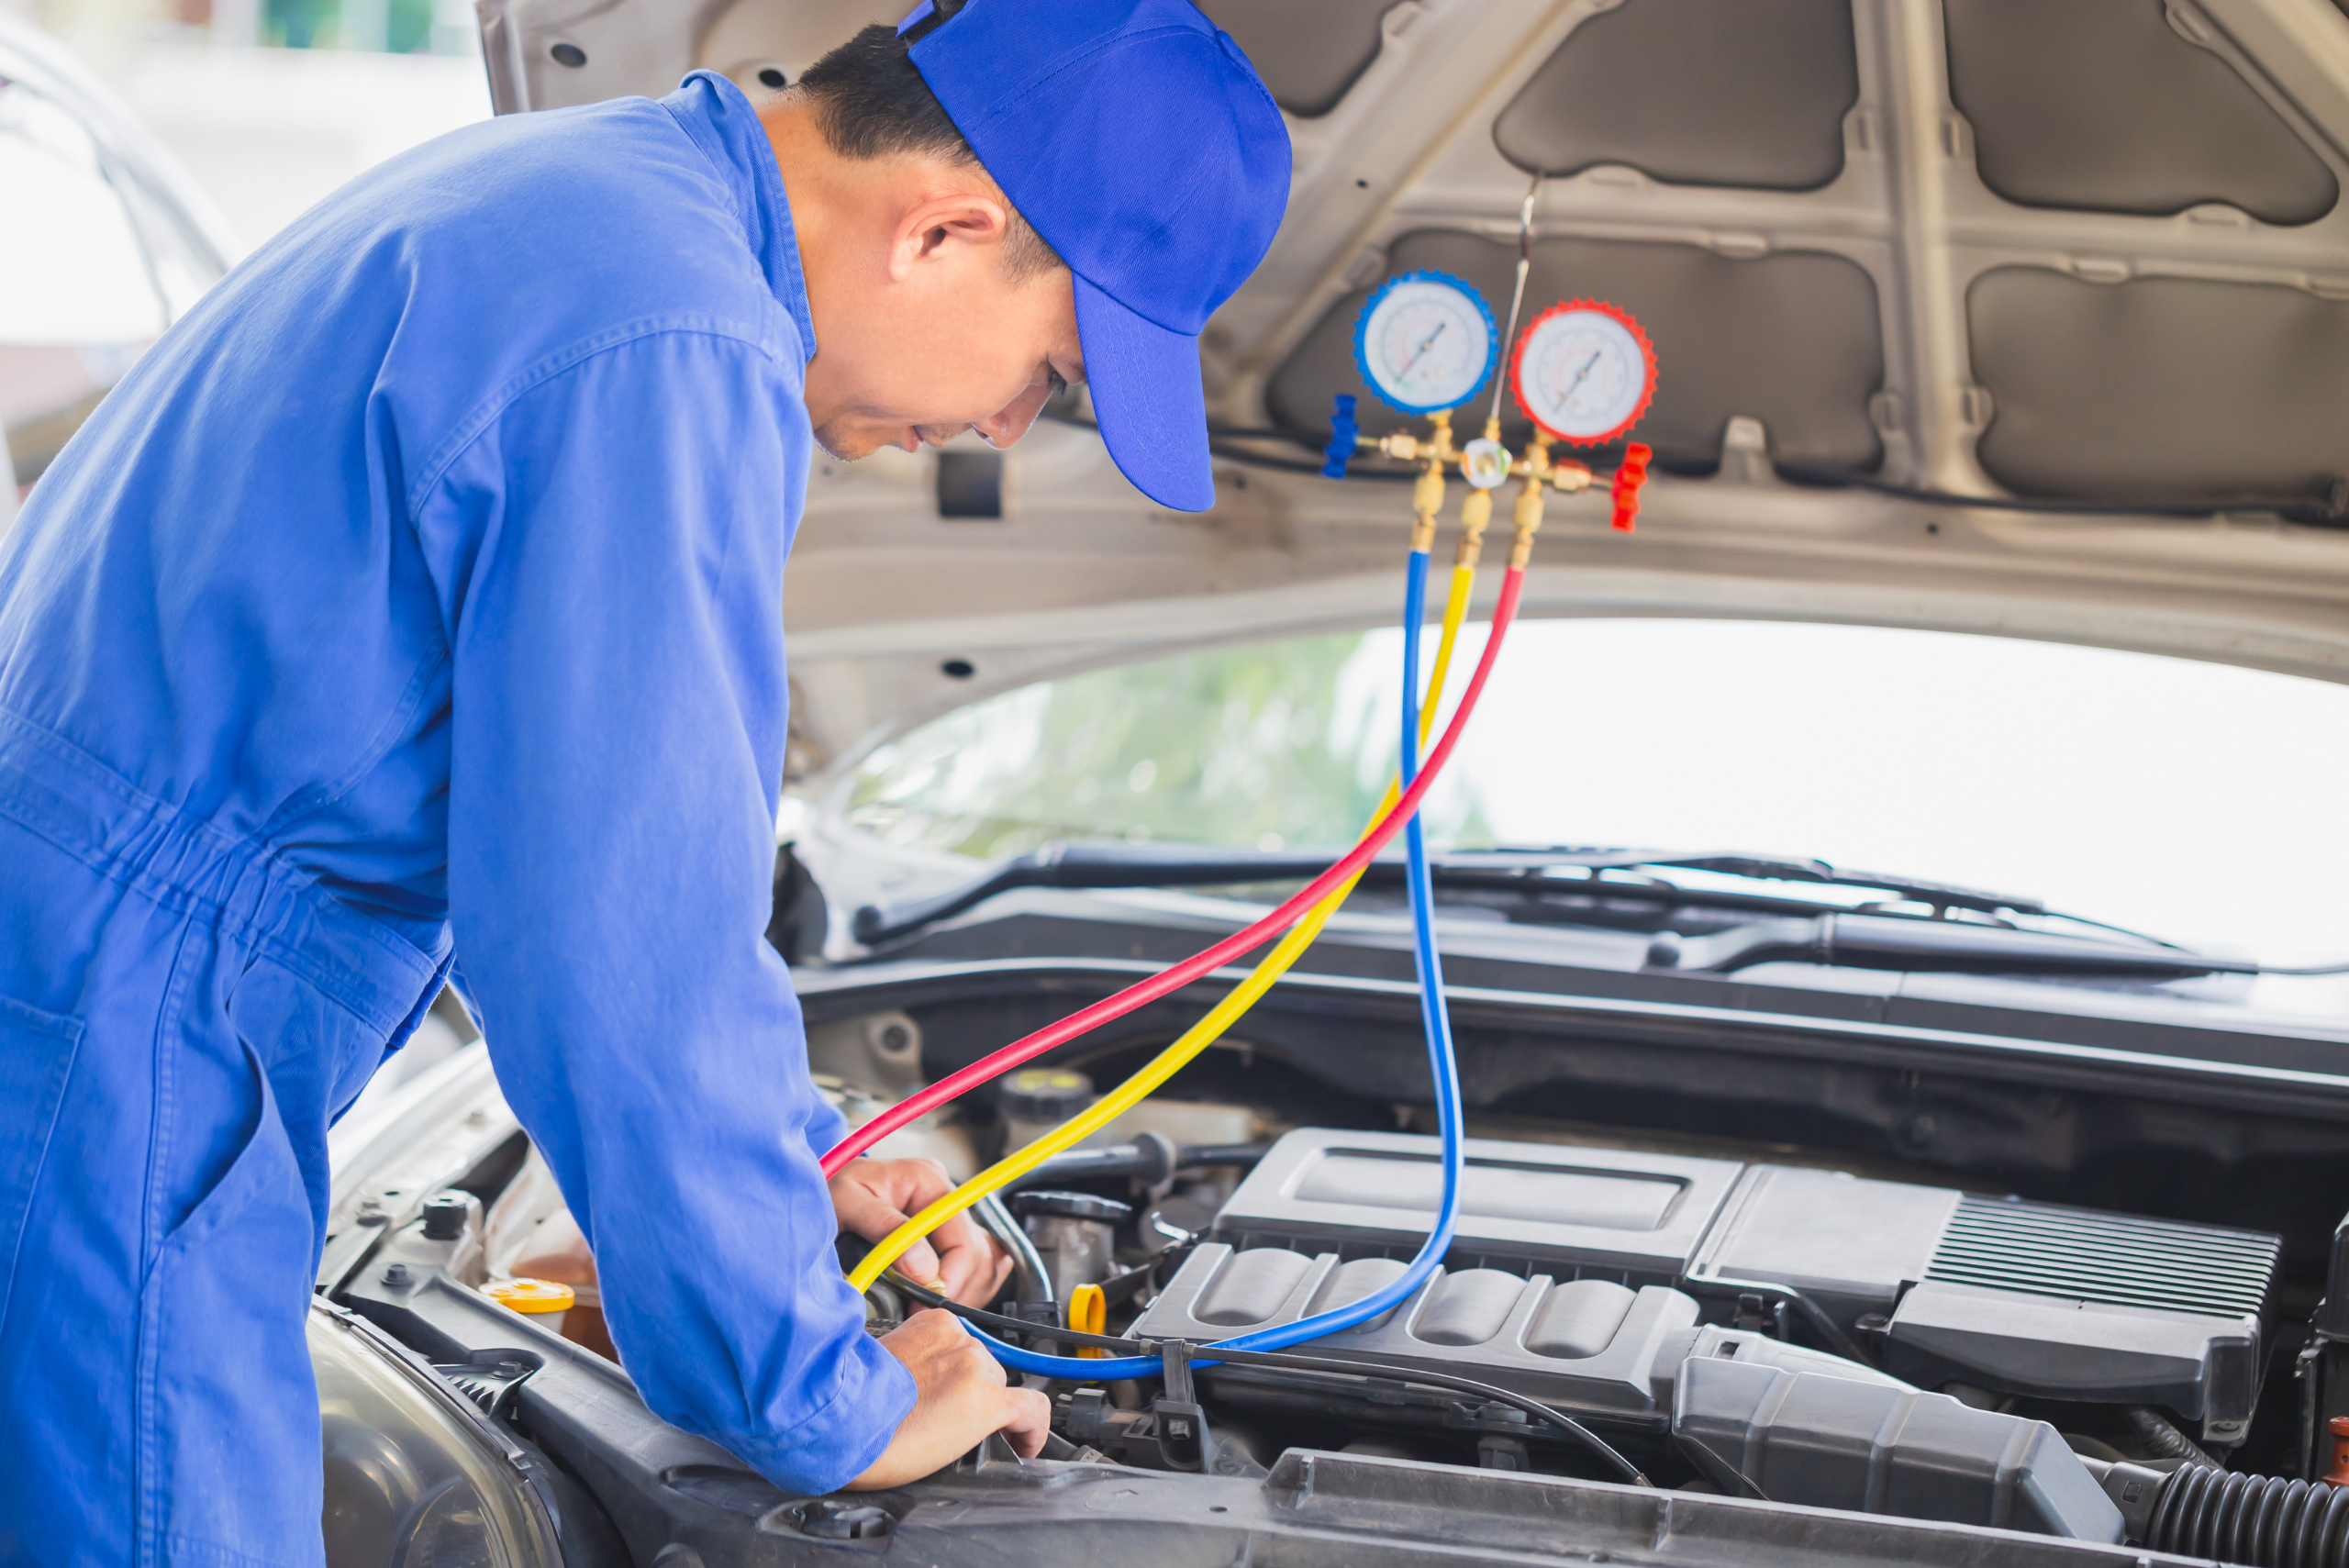 A person in all blue using an AC recharging tool under the hood of a car.